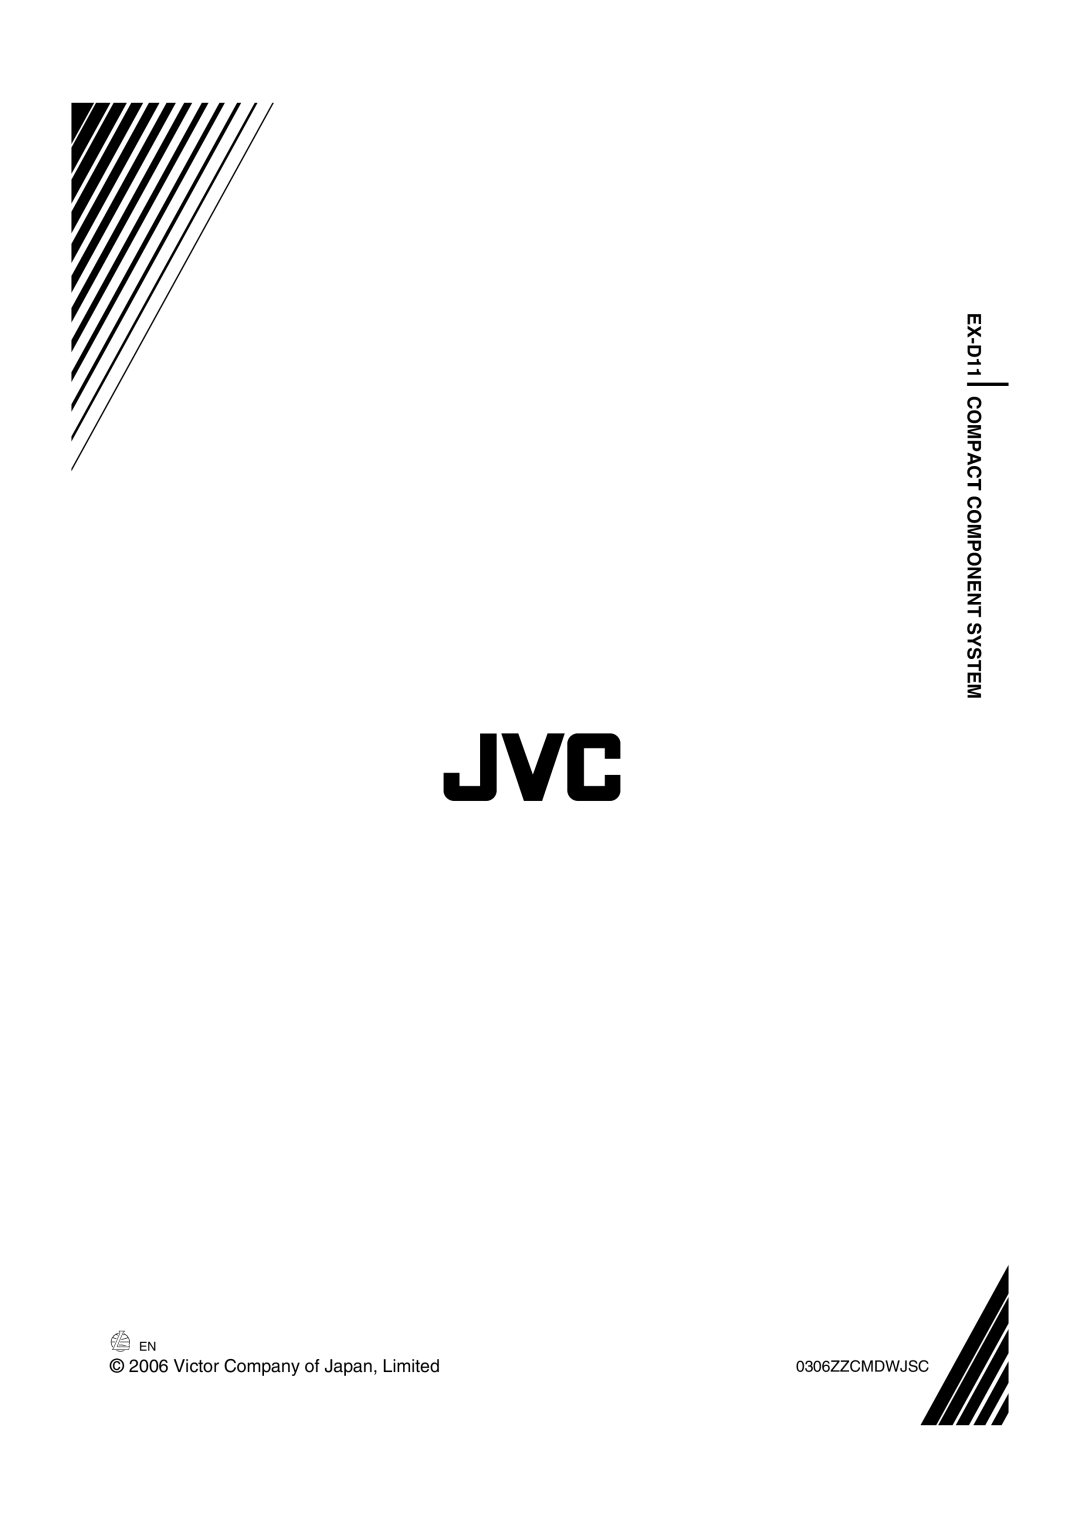 JVC manual EX-D11COMPACT COMPONENT SYSTEM, c 2006 Victor Company of Japan, Limited 